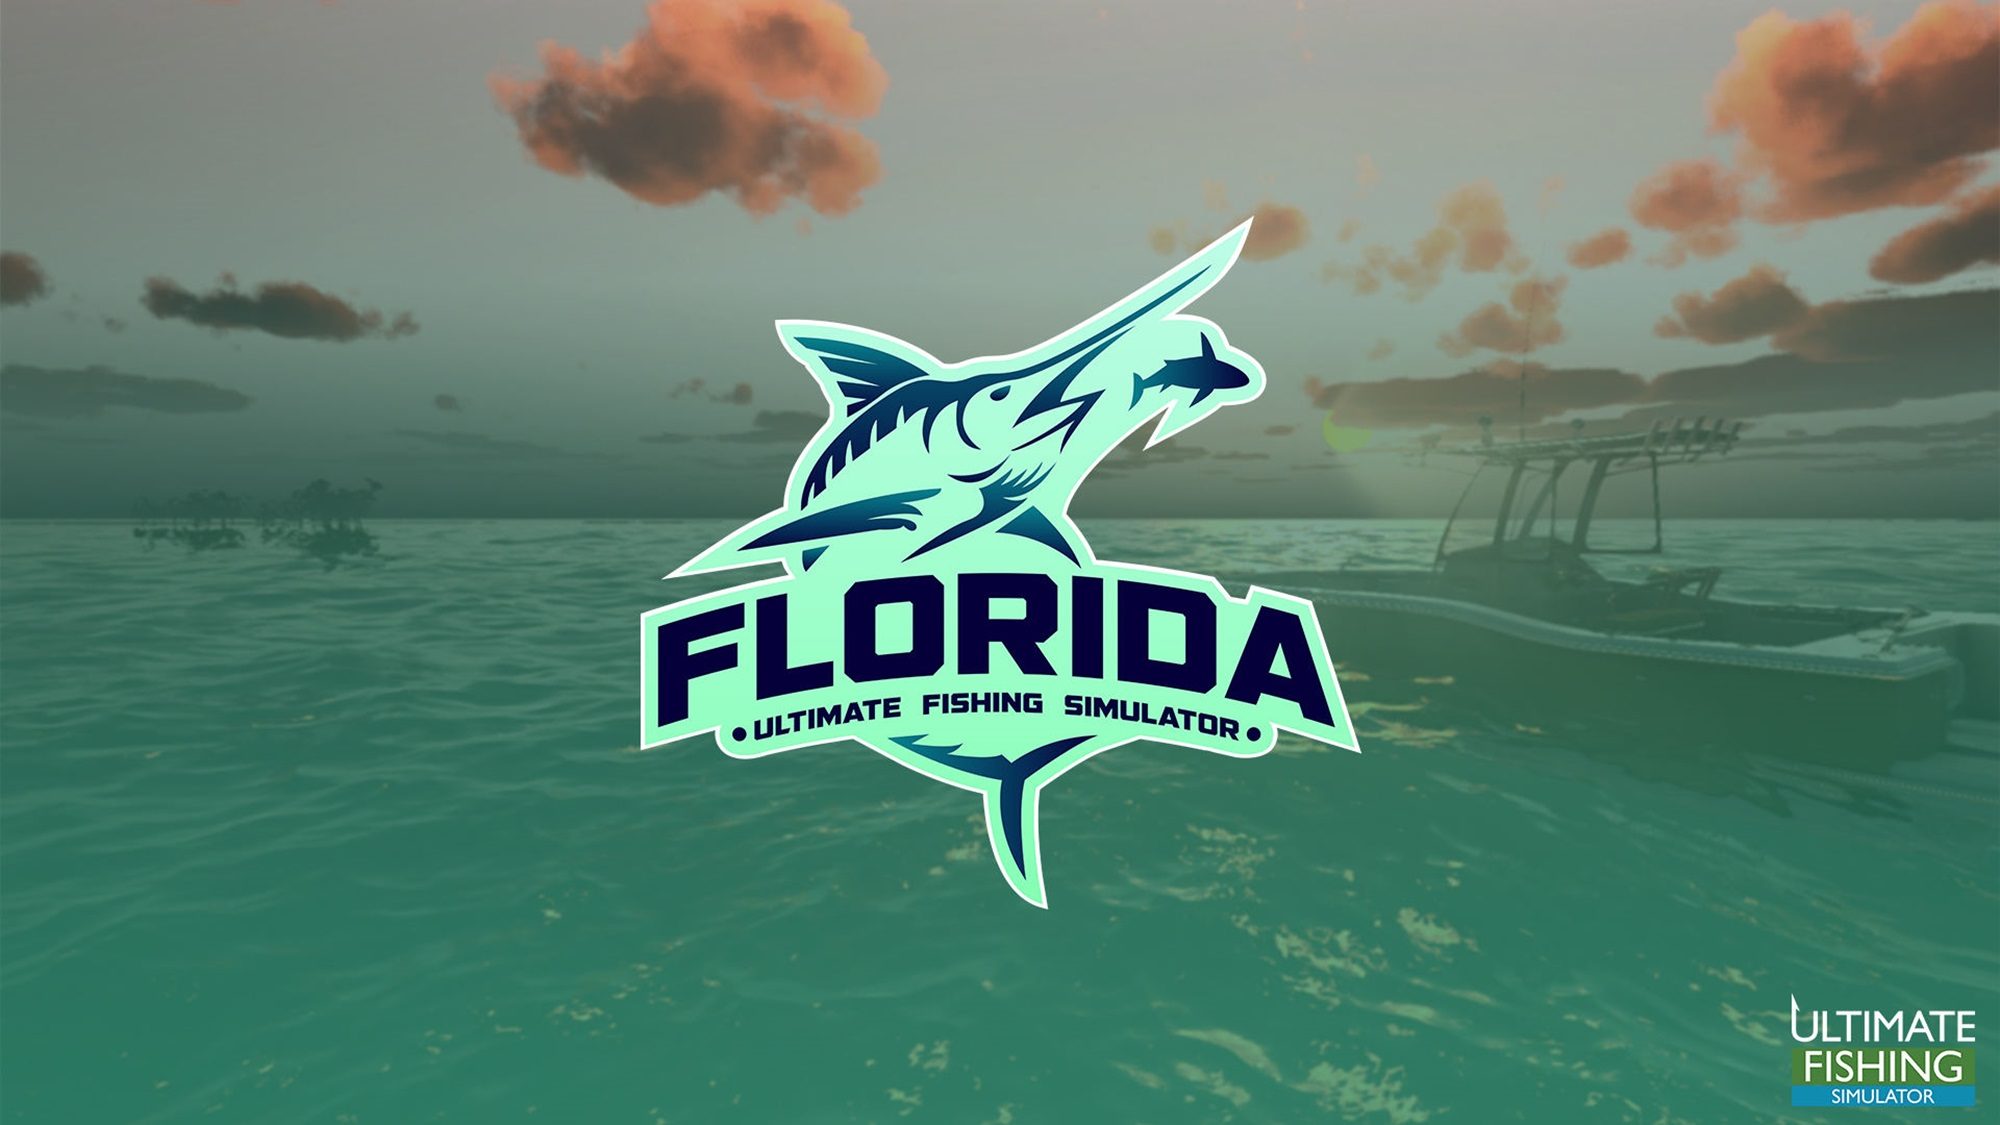 Ultimate Fishing Simulator Goes To Florida In New DLC